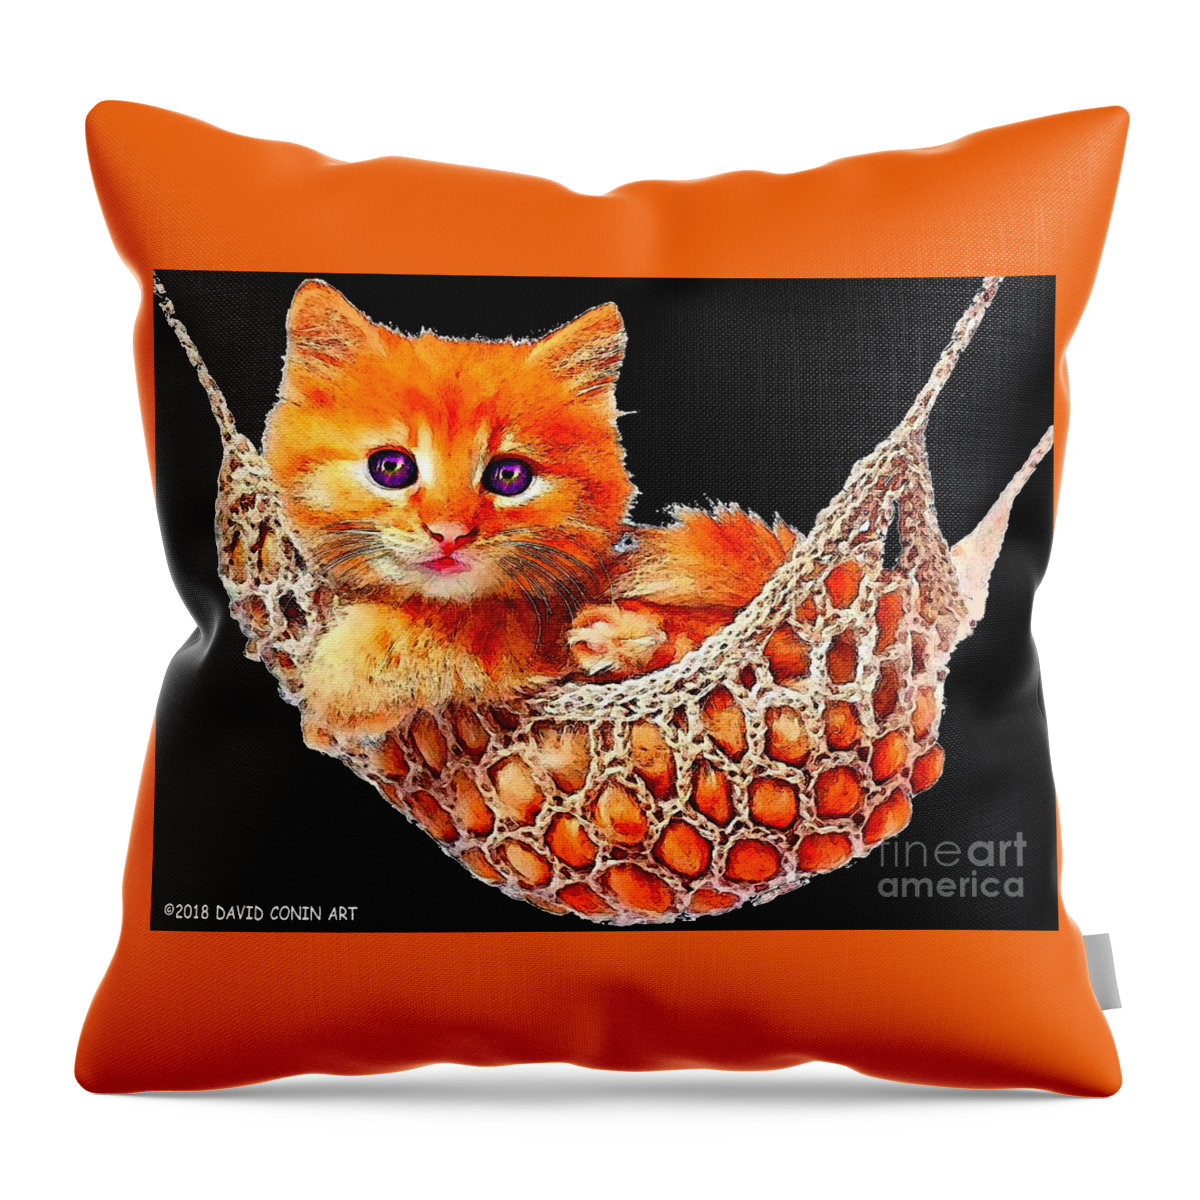 Lovely French Cat Throw Pillow featuring the digital art Lovely French Cat by David Conin